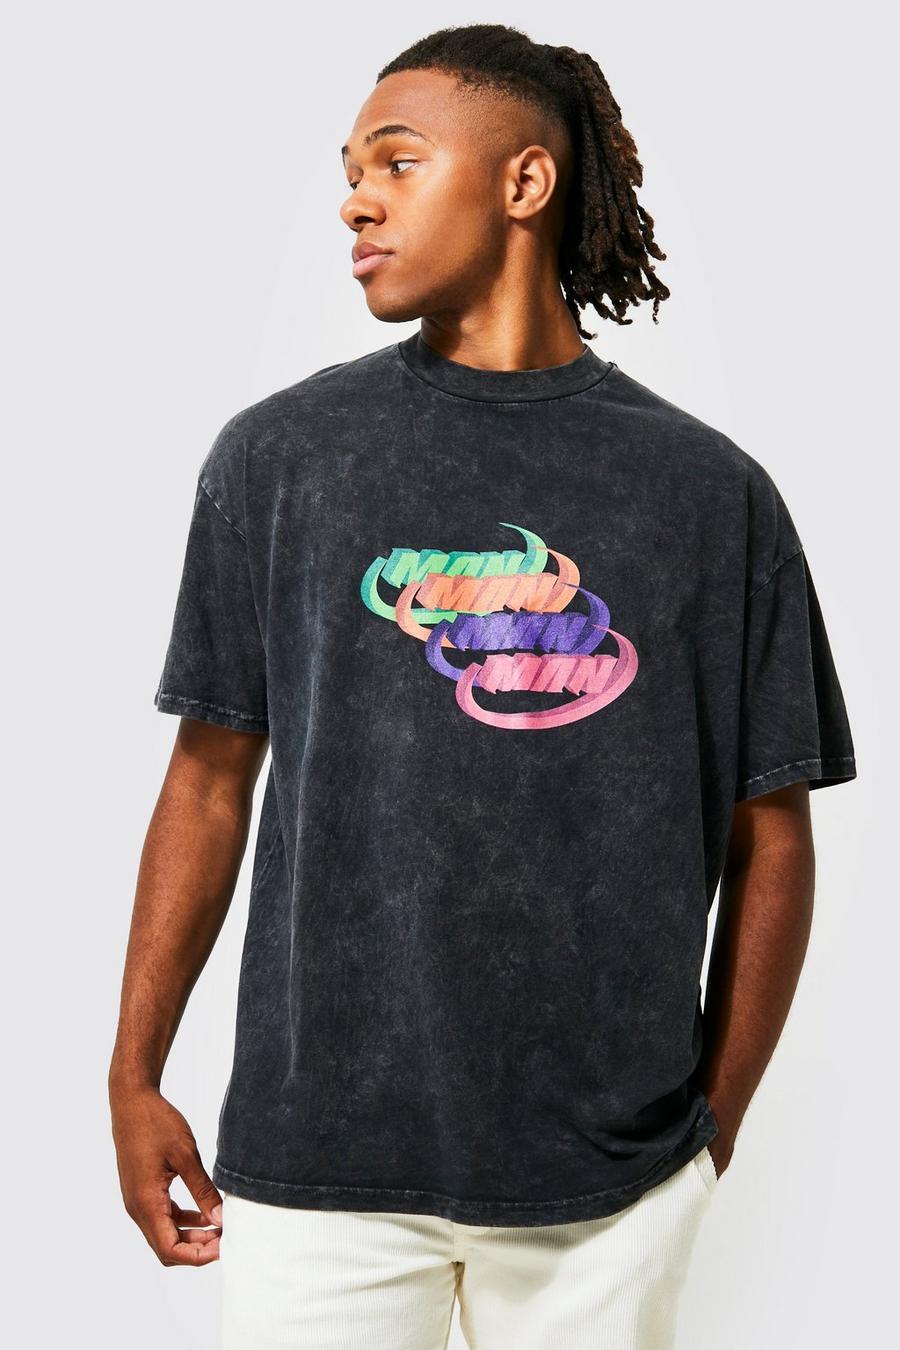 Charcoal grey Oversized Extended Washed Graphic T-shirt